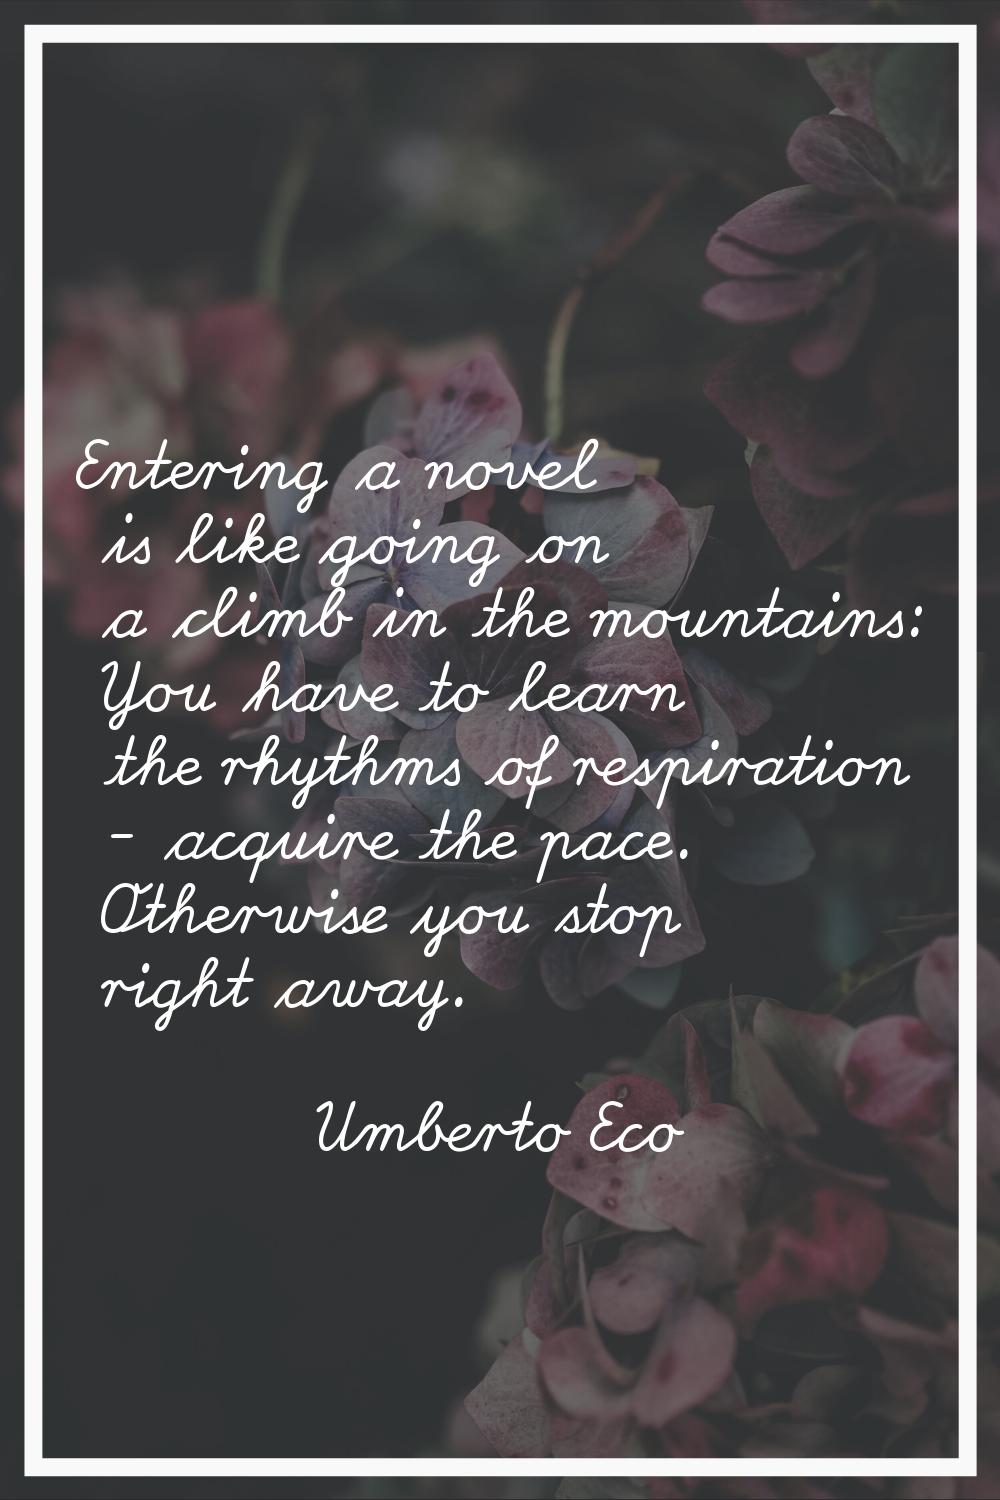 Entering a novel is like going on a climb in the mountains: You have to learn the rhythms of respir